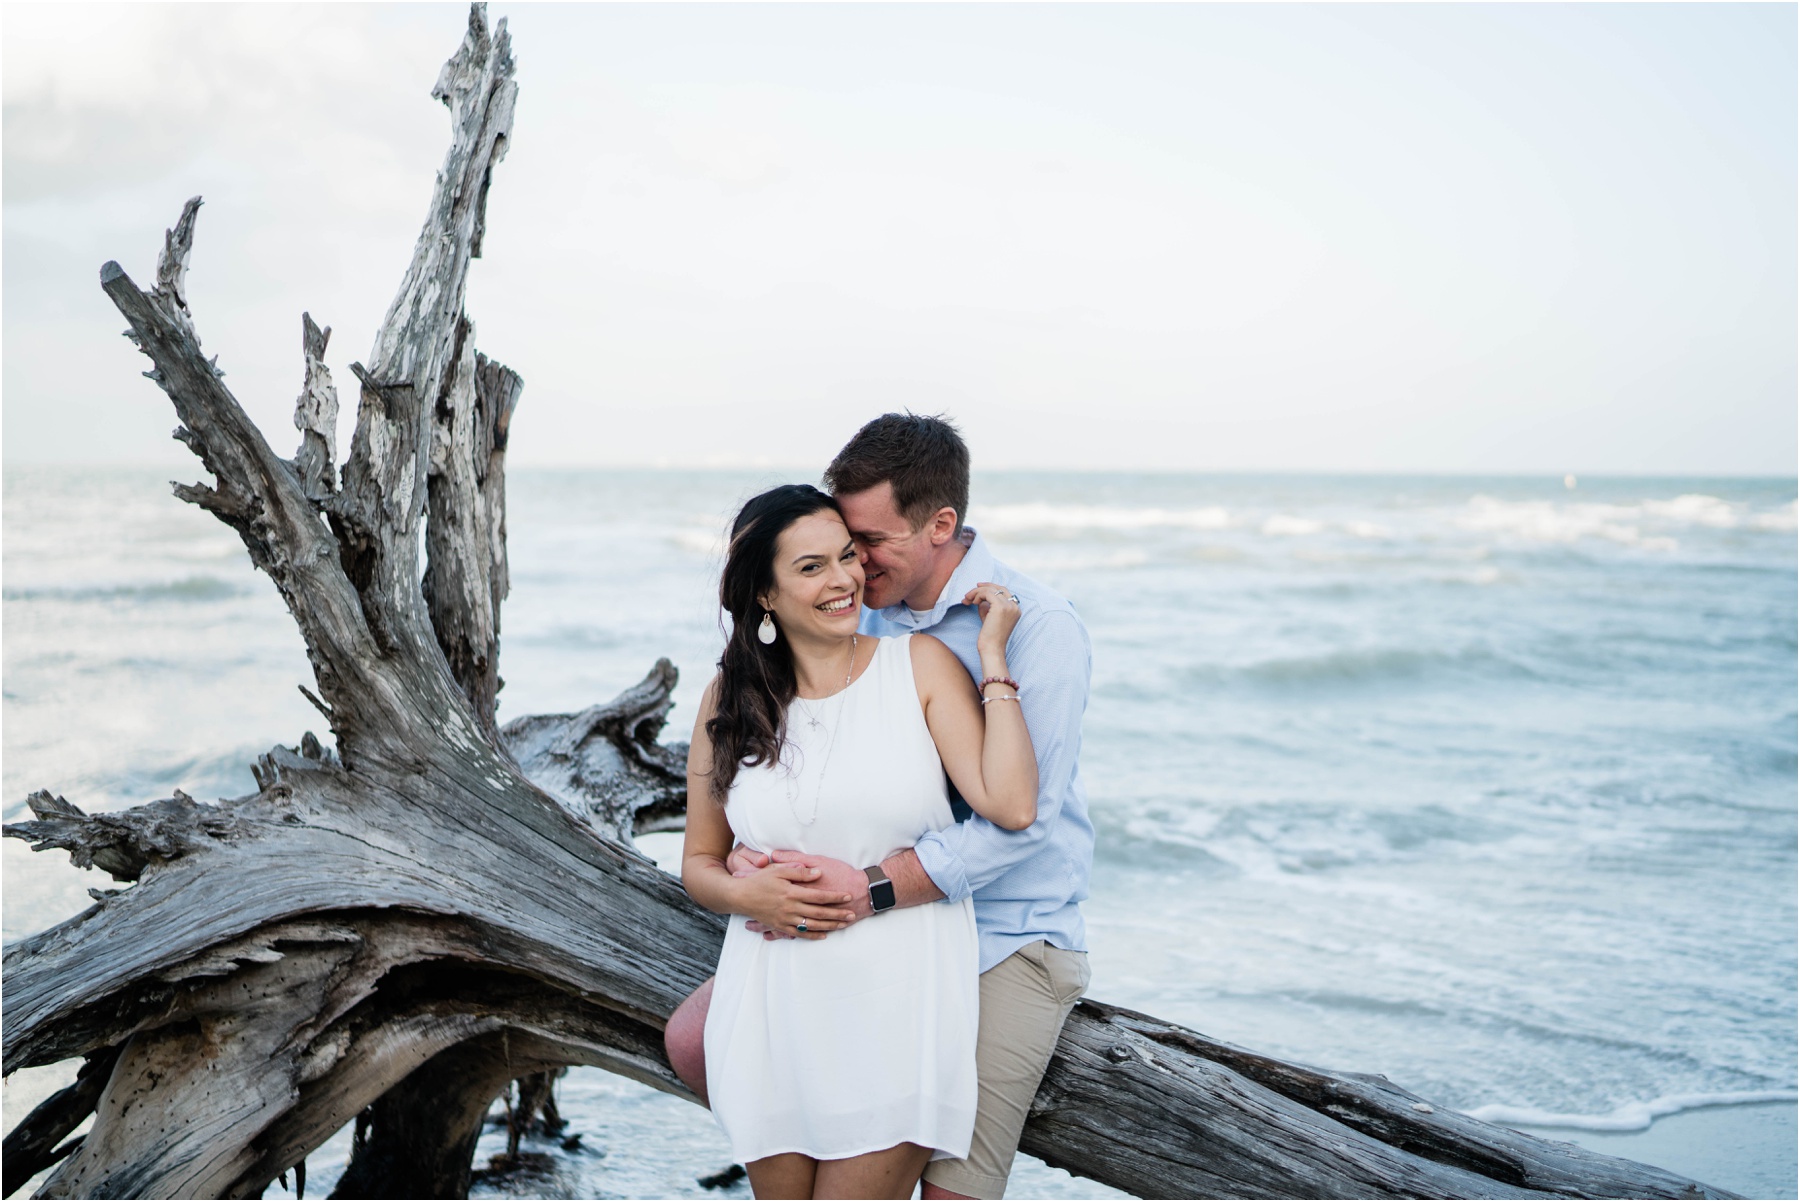 Couple laughs as they embrace on Sanibel Island beach during engagement session.